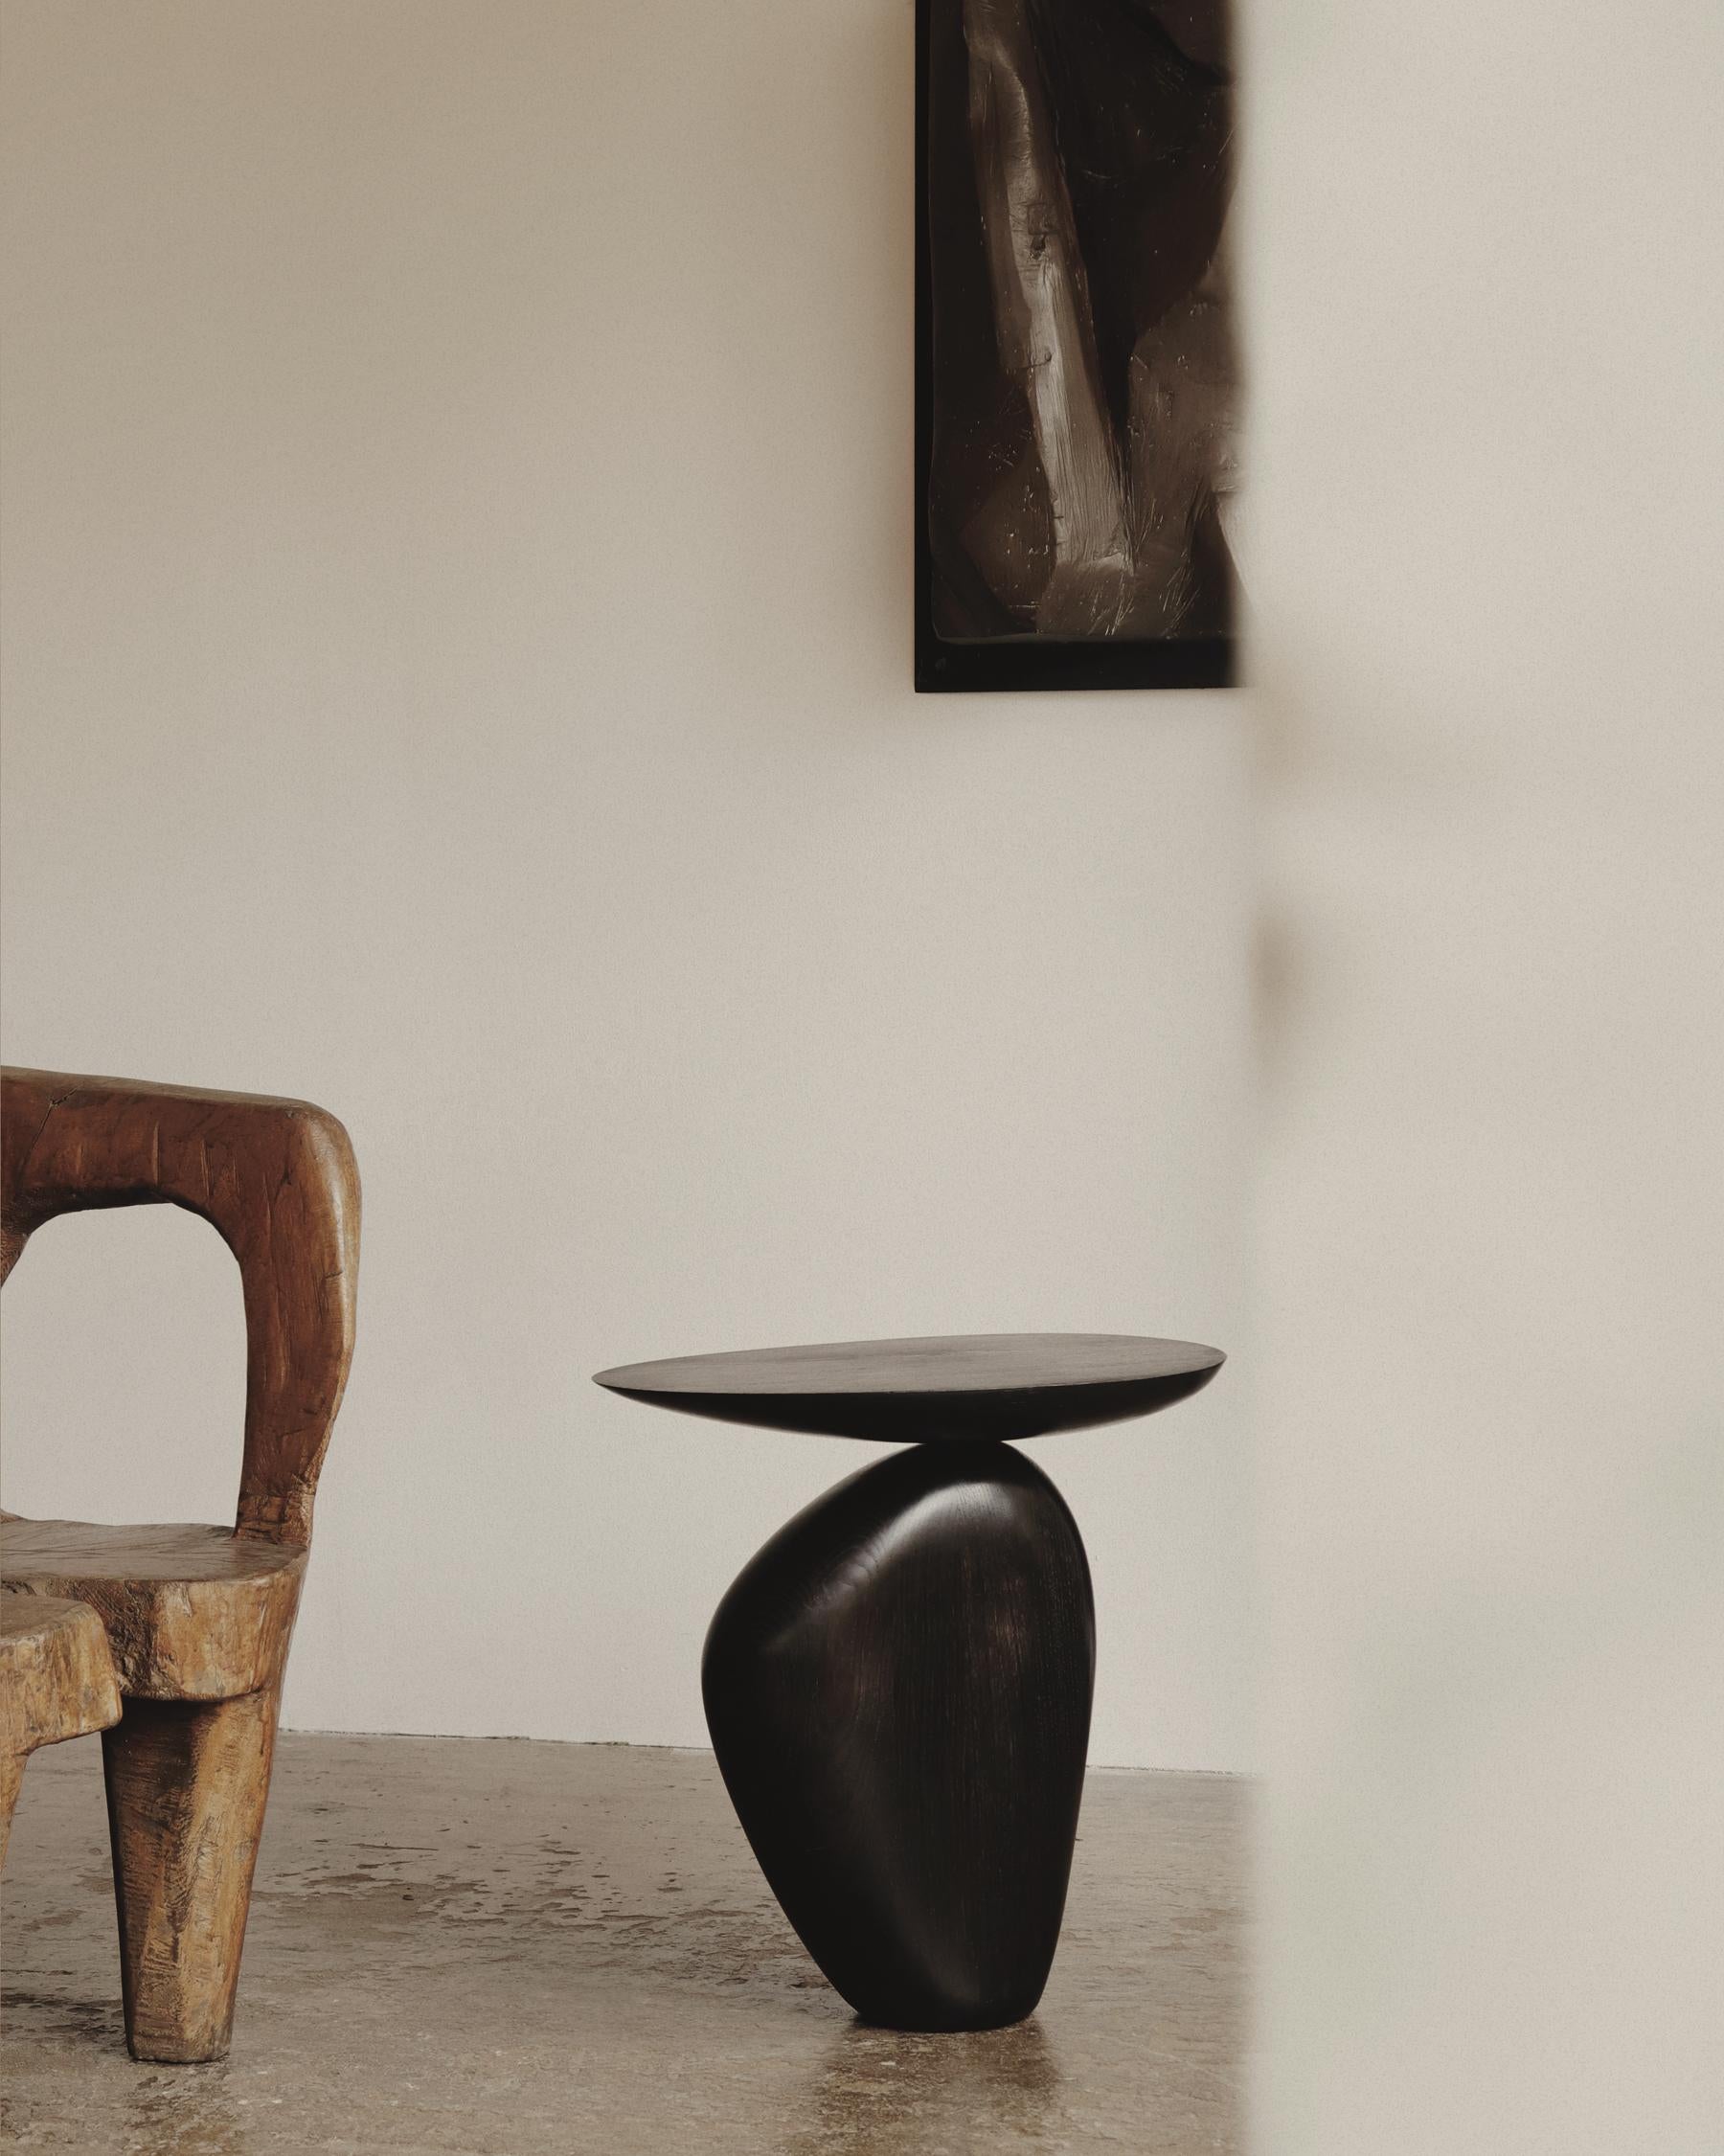 Rive oak side table by Homefolks
Dimensions: D 32.5 x W 50 x H 50 cm 
Materials: oak wood

An exercise of balance, the Rive side table is composed of two sensuous, organic wood forms. Evoking stacked pebbles, its bold and sculptural shape echoes